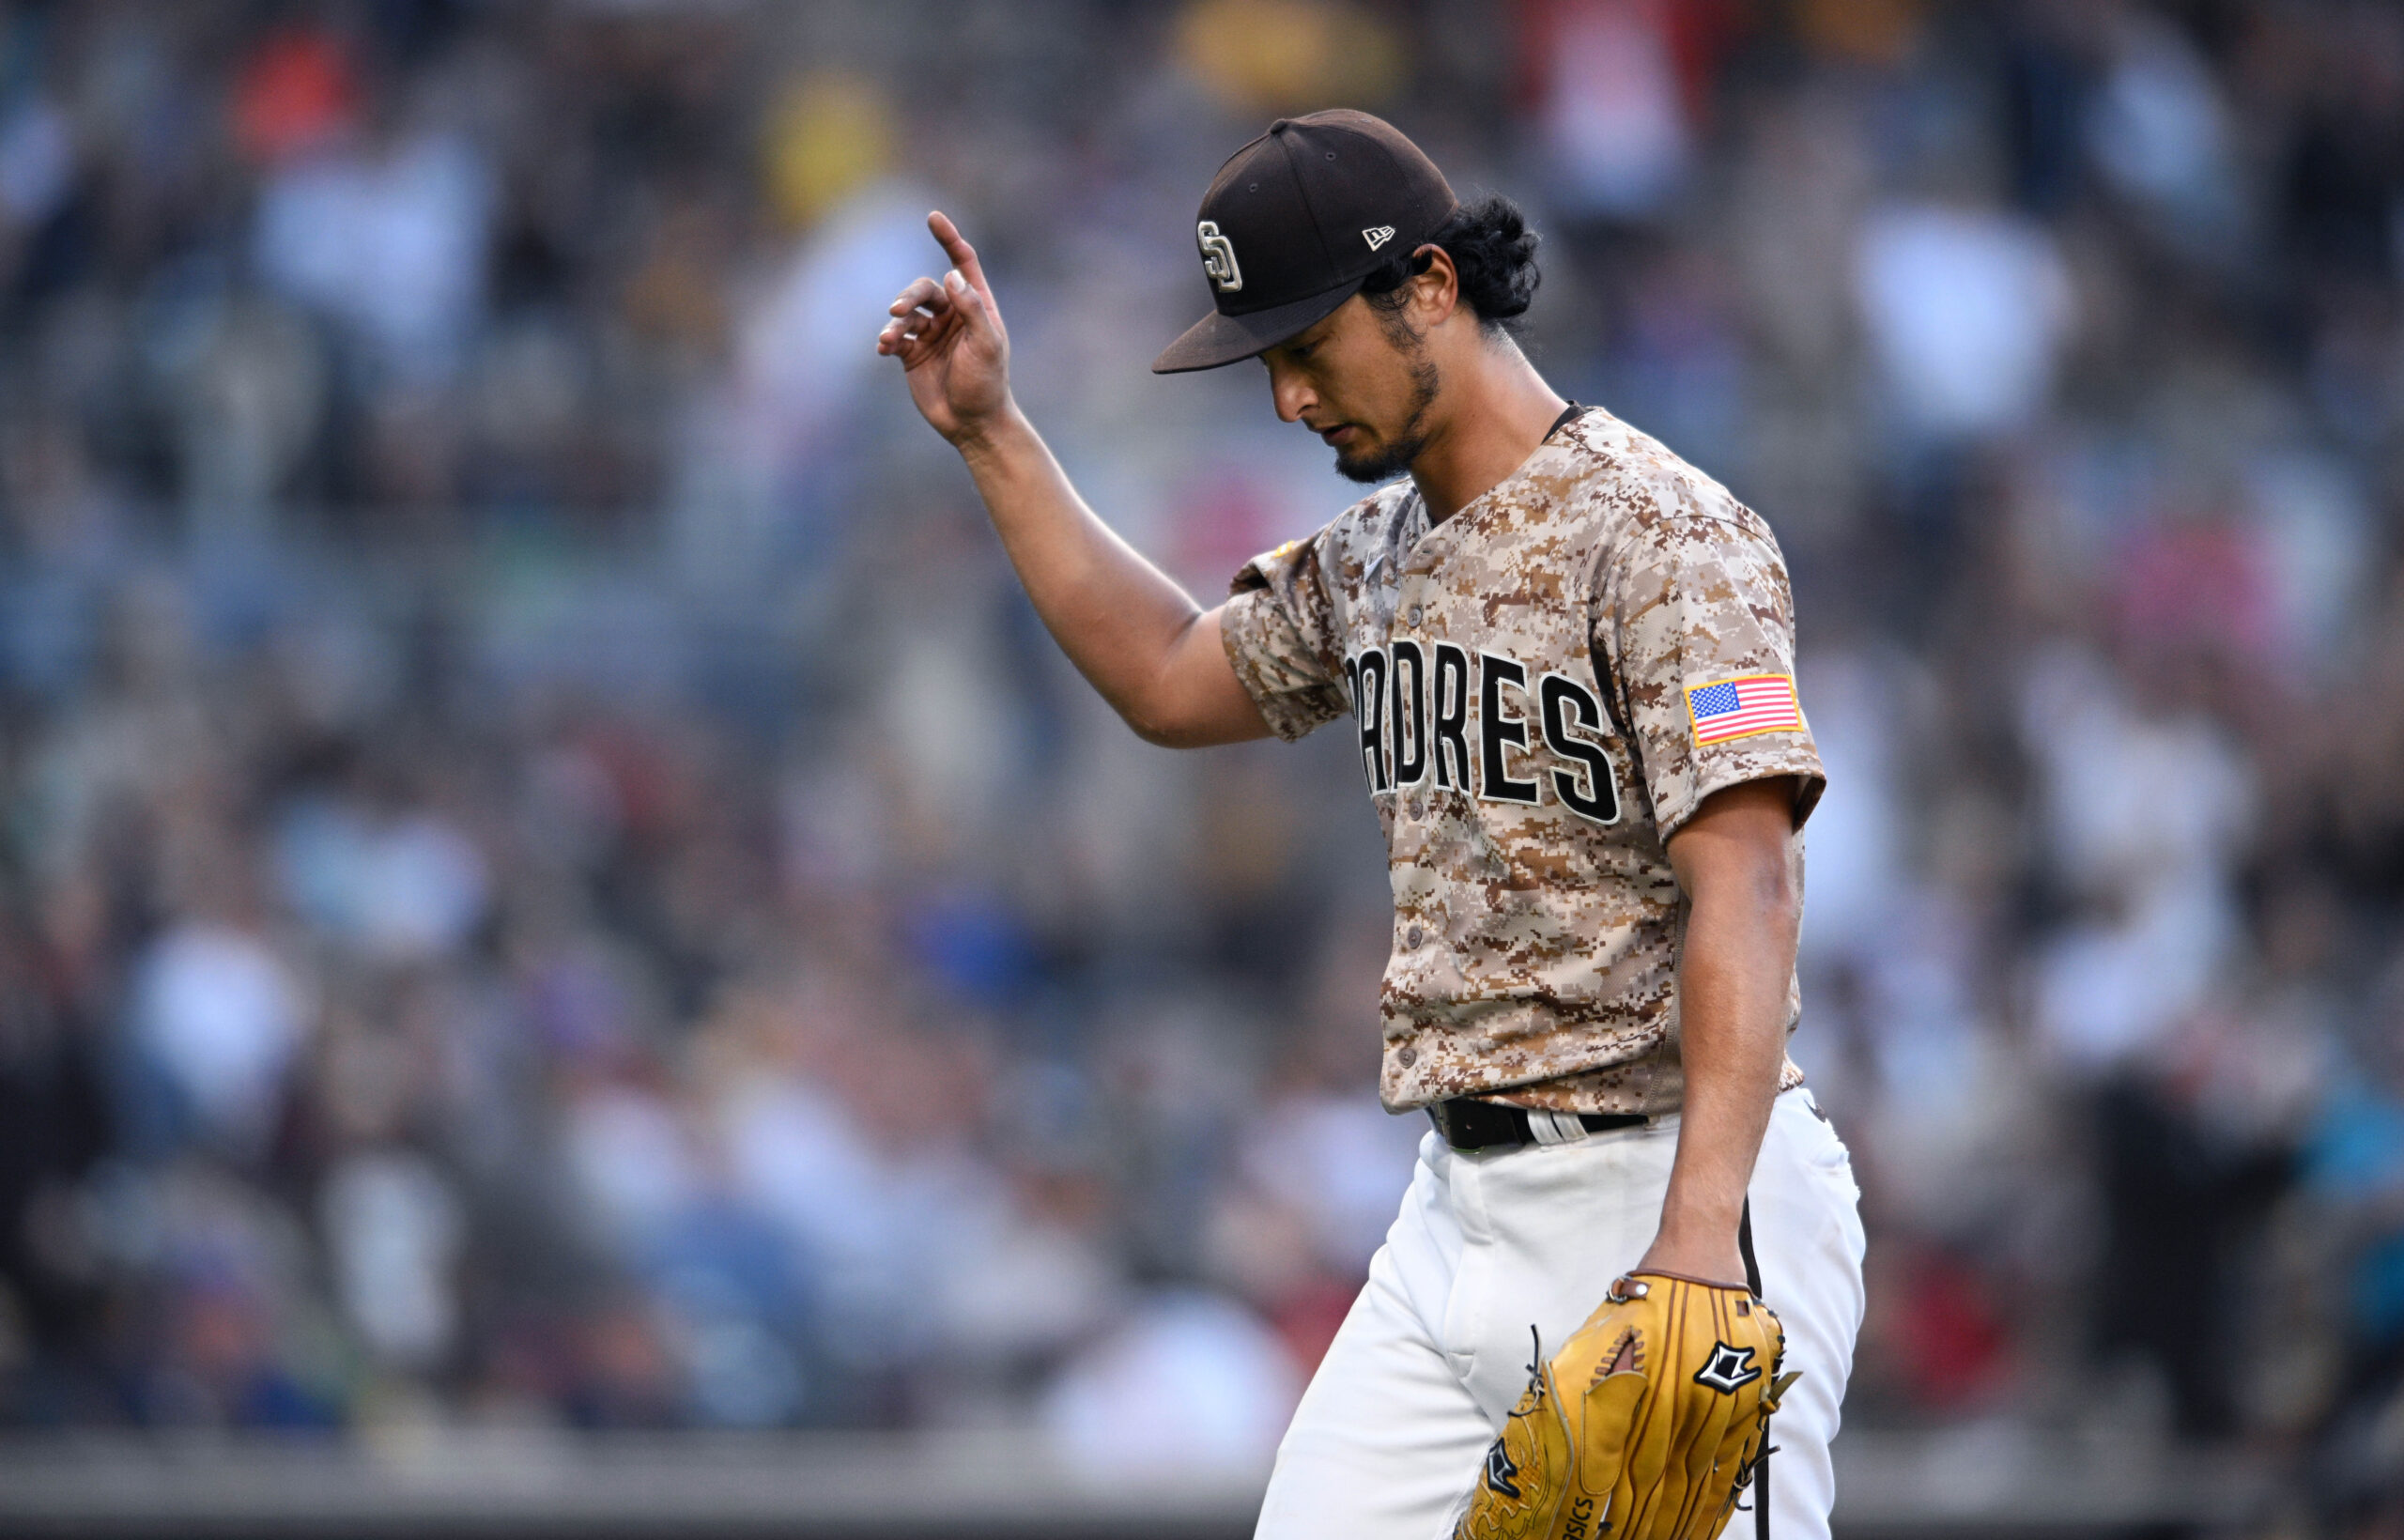 padres camouflage uniforms